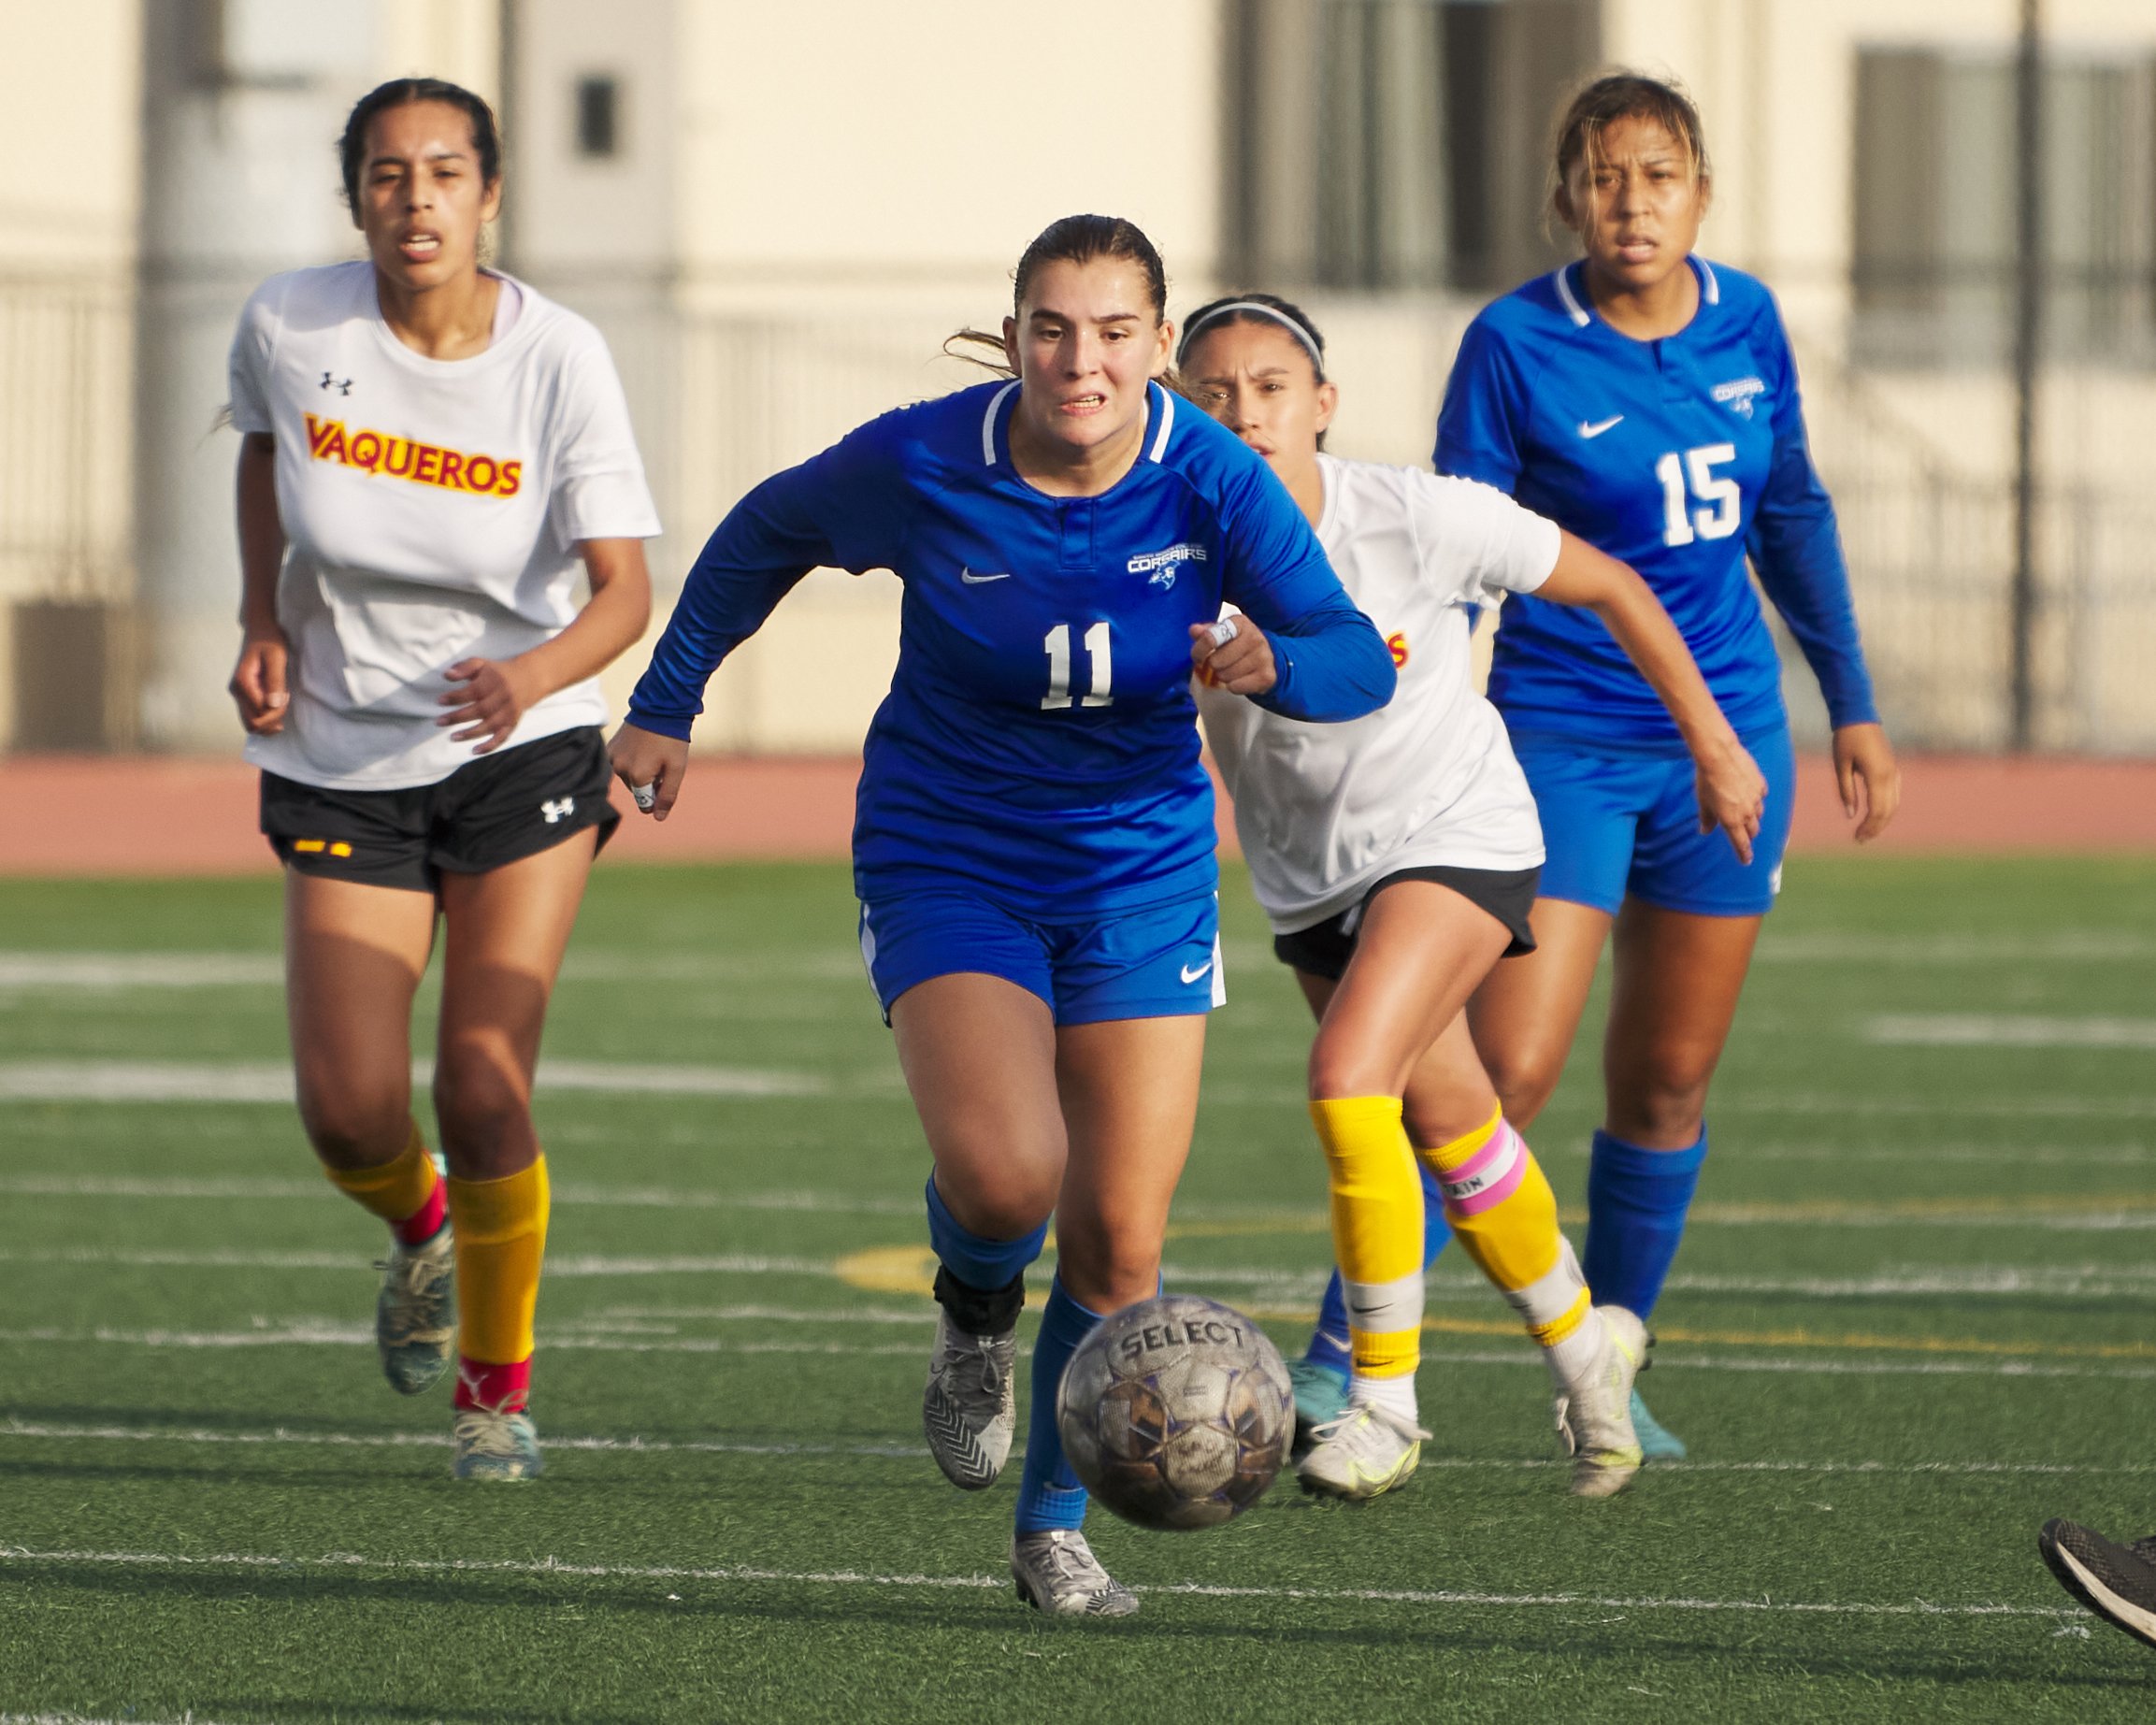  Santa Monica College Corsairs' Eden Bechnainou (center) and Jacky Hernandez (right), and Glendale Community College Vaqueros' Stephanie Portillo (left) and Isabel Moran (center right) during the women's soccer match on Friday, Oct. 21, 2022, at Cors